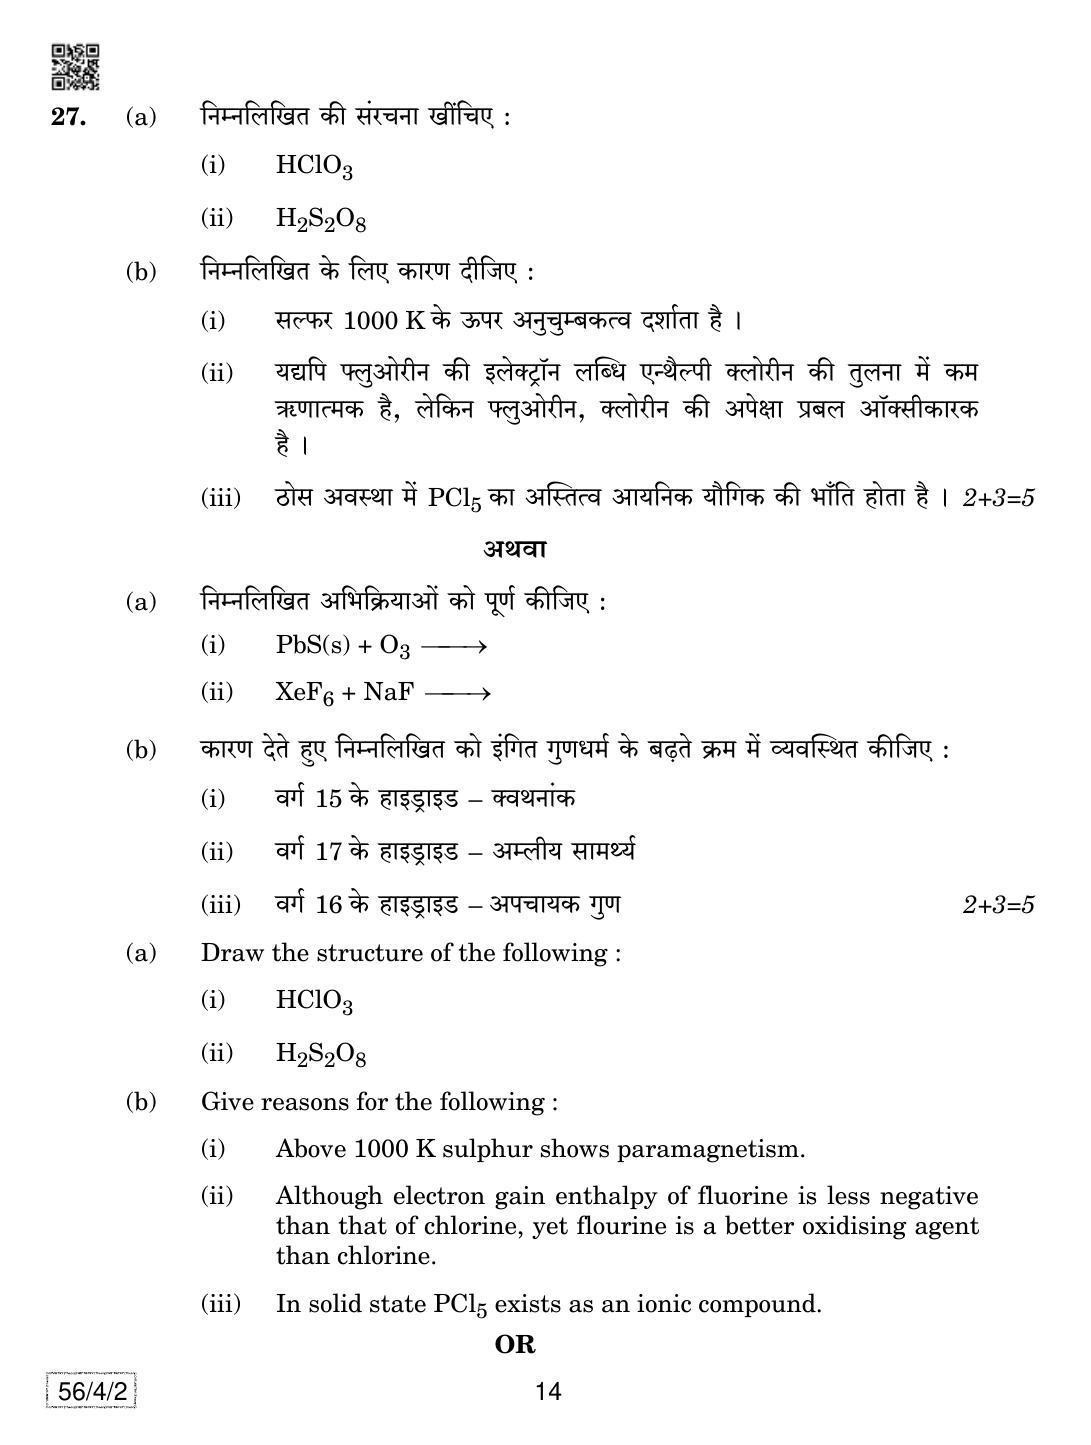 CBSE Class 12 56-4-2 Chemistry 2019 Question Paper - Page 14